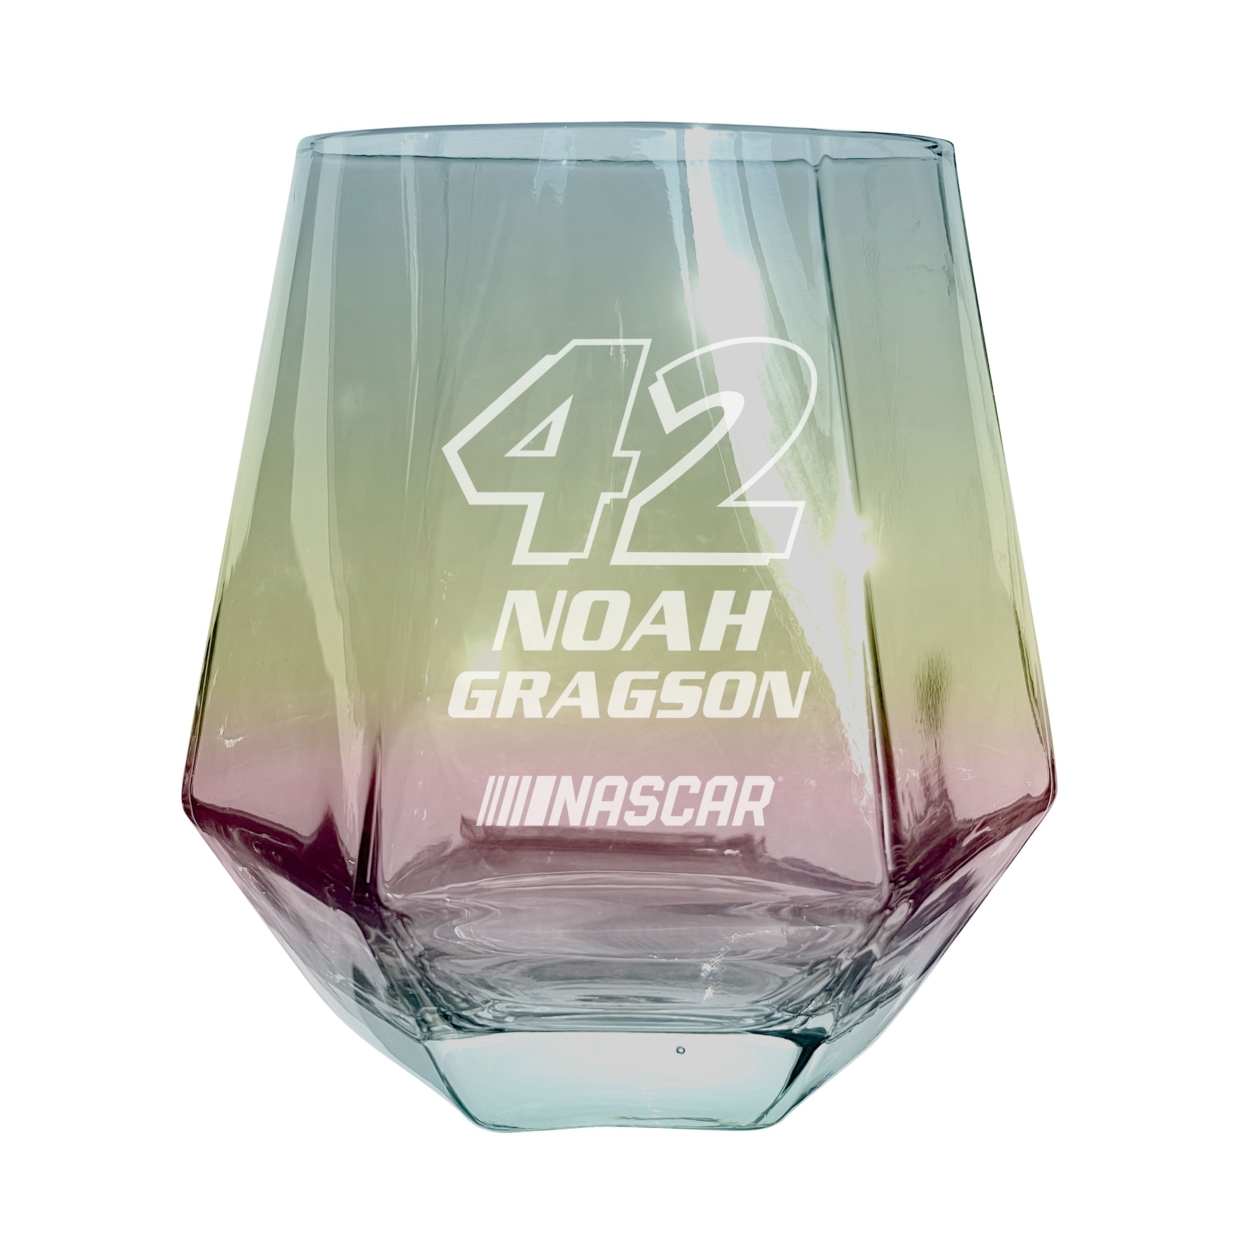 #42 Noah Gragson Officially Licensed 10 Oz Engraved Diamond Wine Glass - Grey, 2-Pack